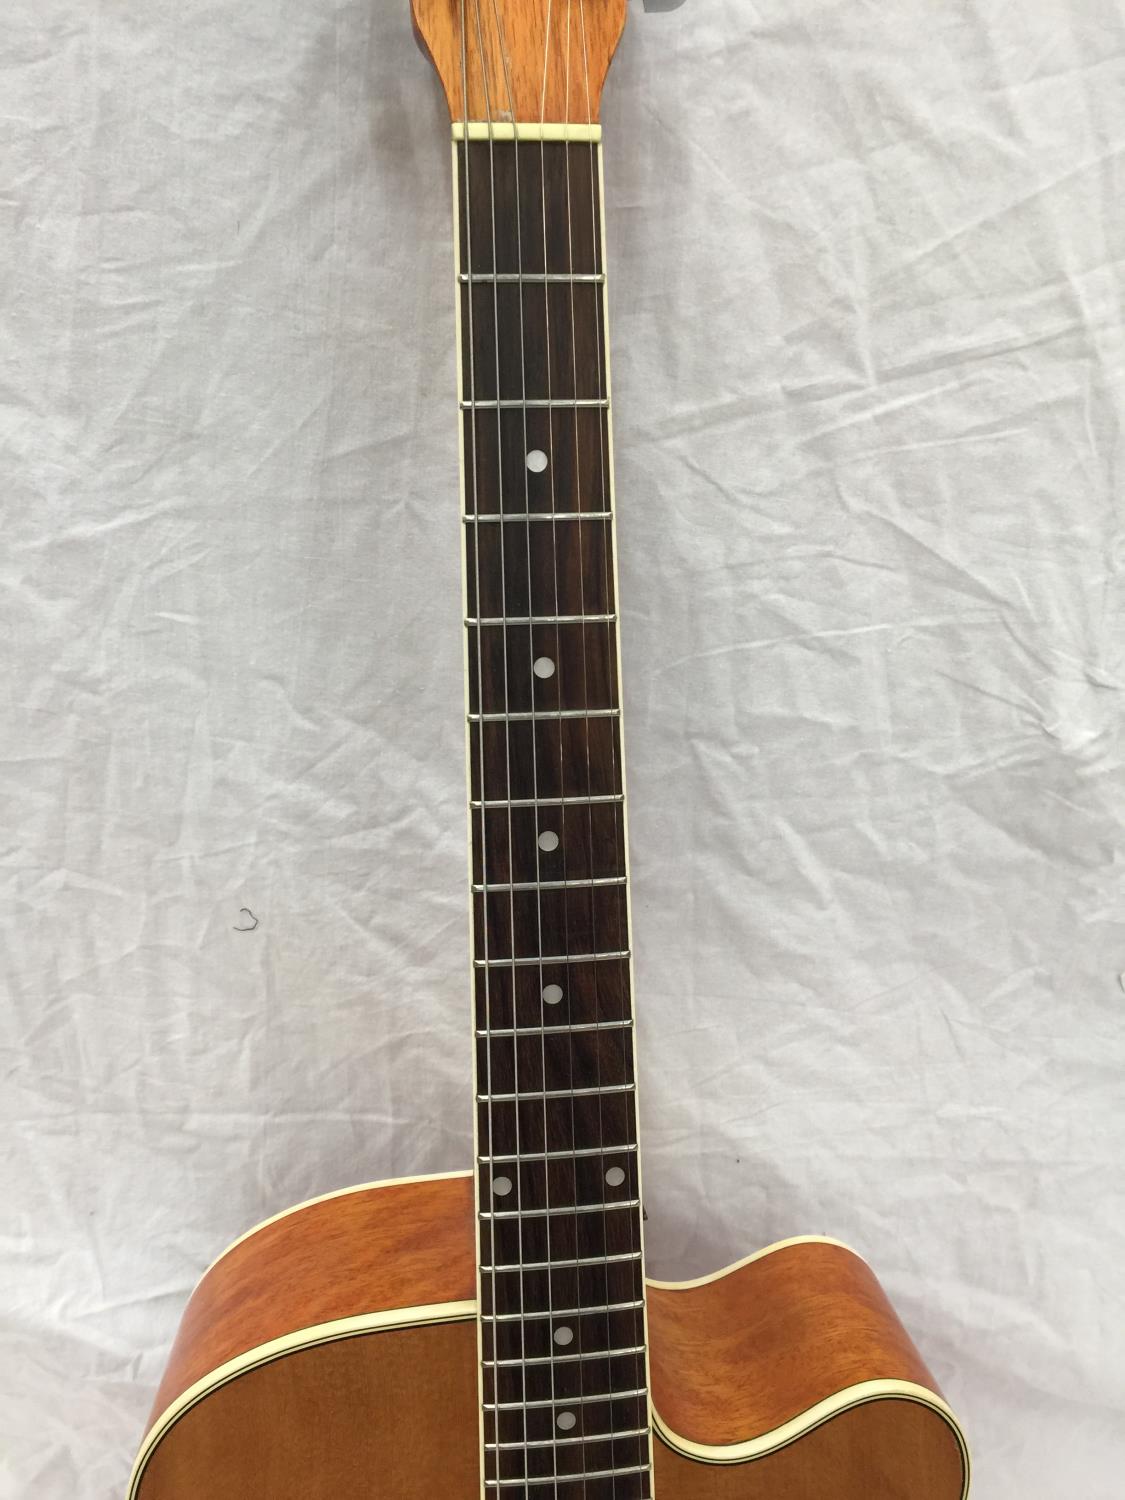 A TANGLEWOOD NASHVILLE SEMI ACOUSTIC GUITAR - Image 7 of 15